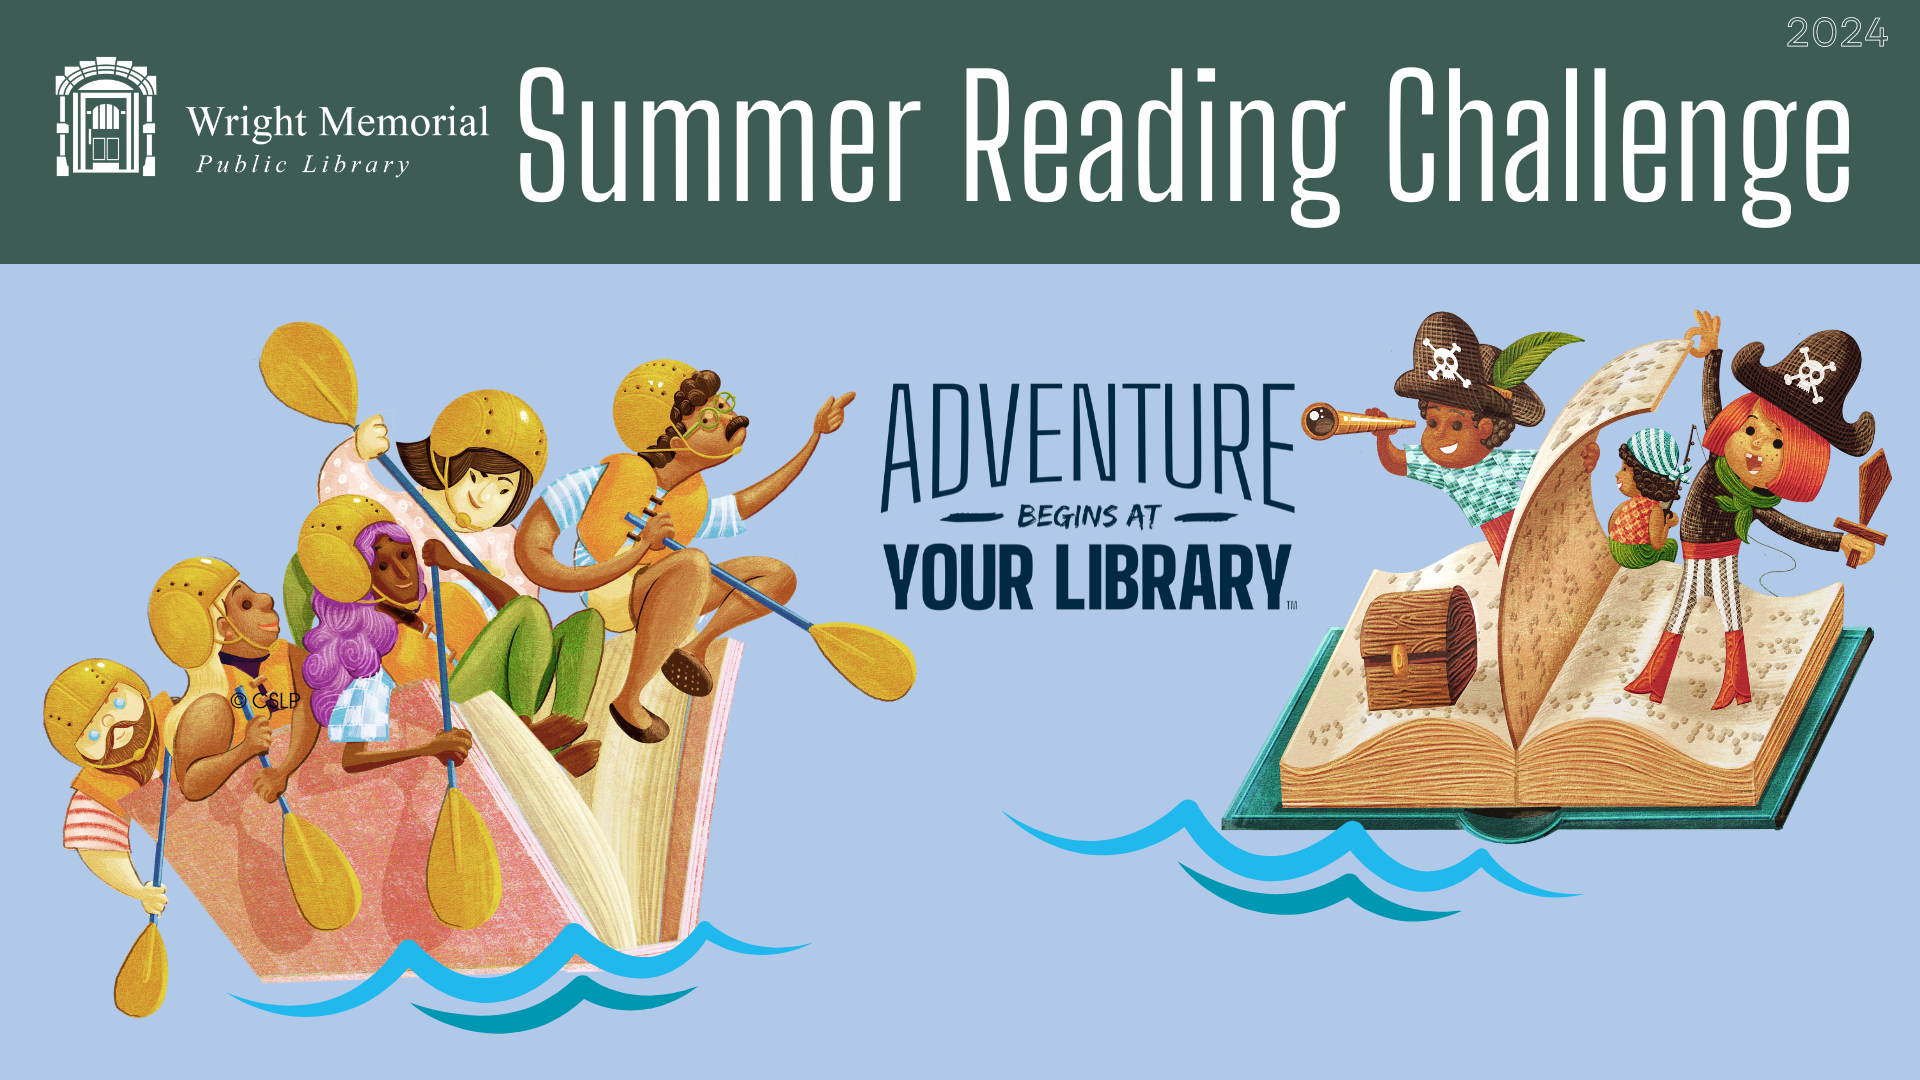 Summer Reading Challenge at Wright Library, June 1-July 31. Adventure at your library